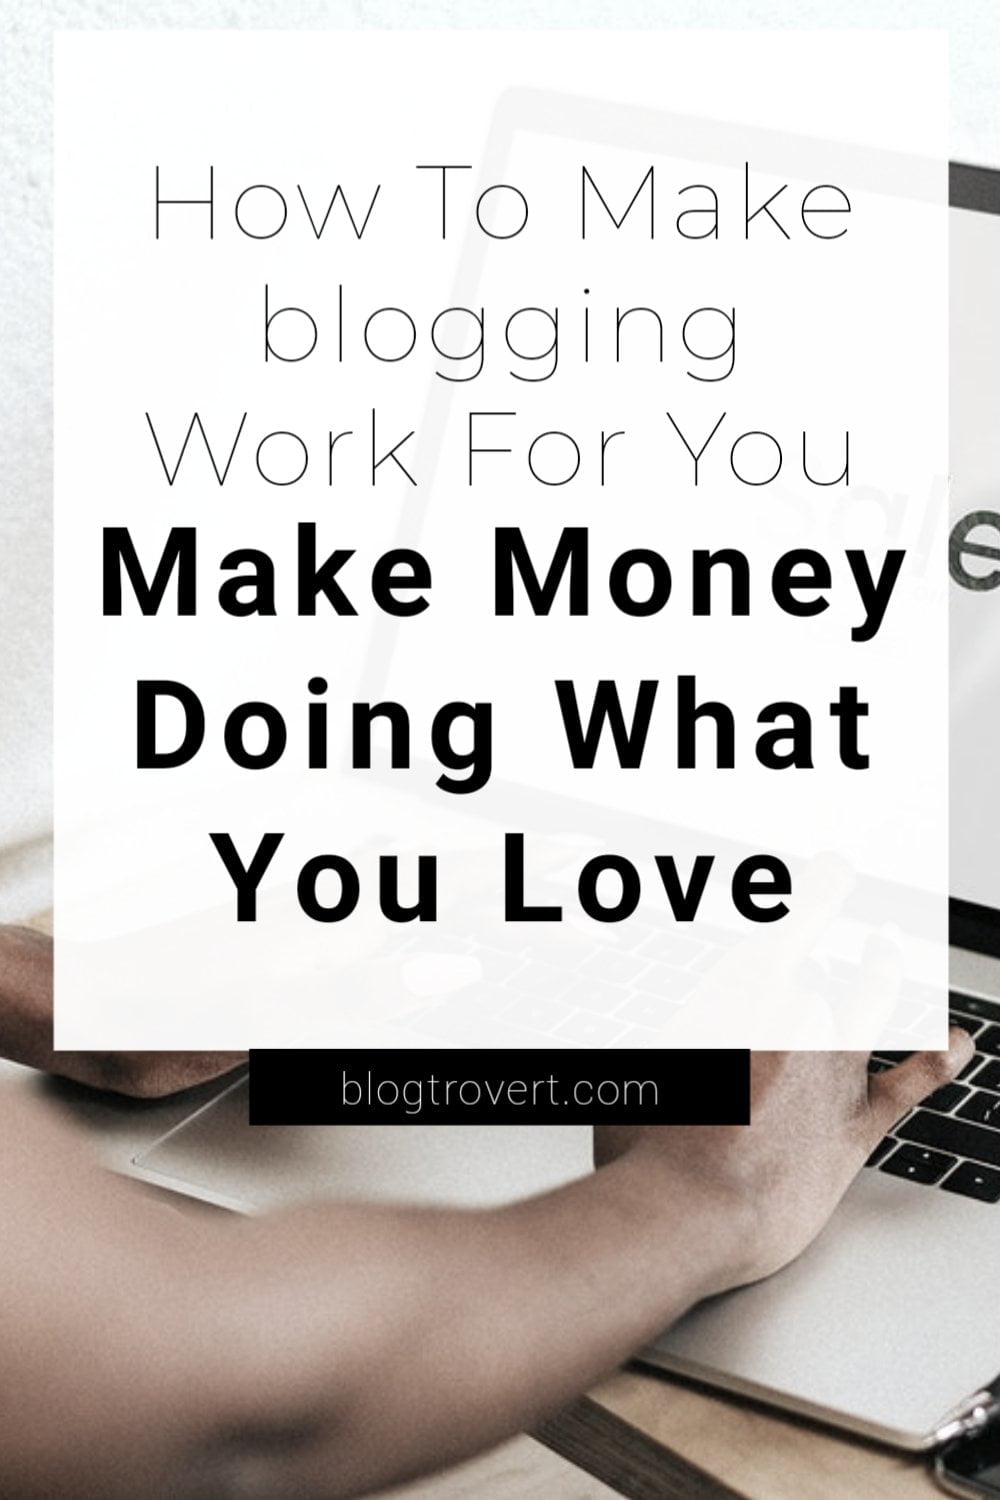 How To Become A Blogger and Make Money: The Ultimate Guide 4